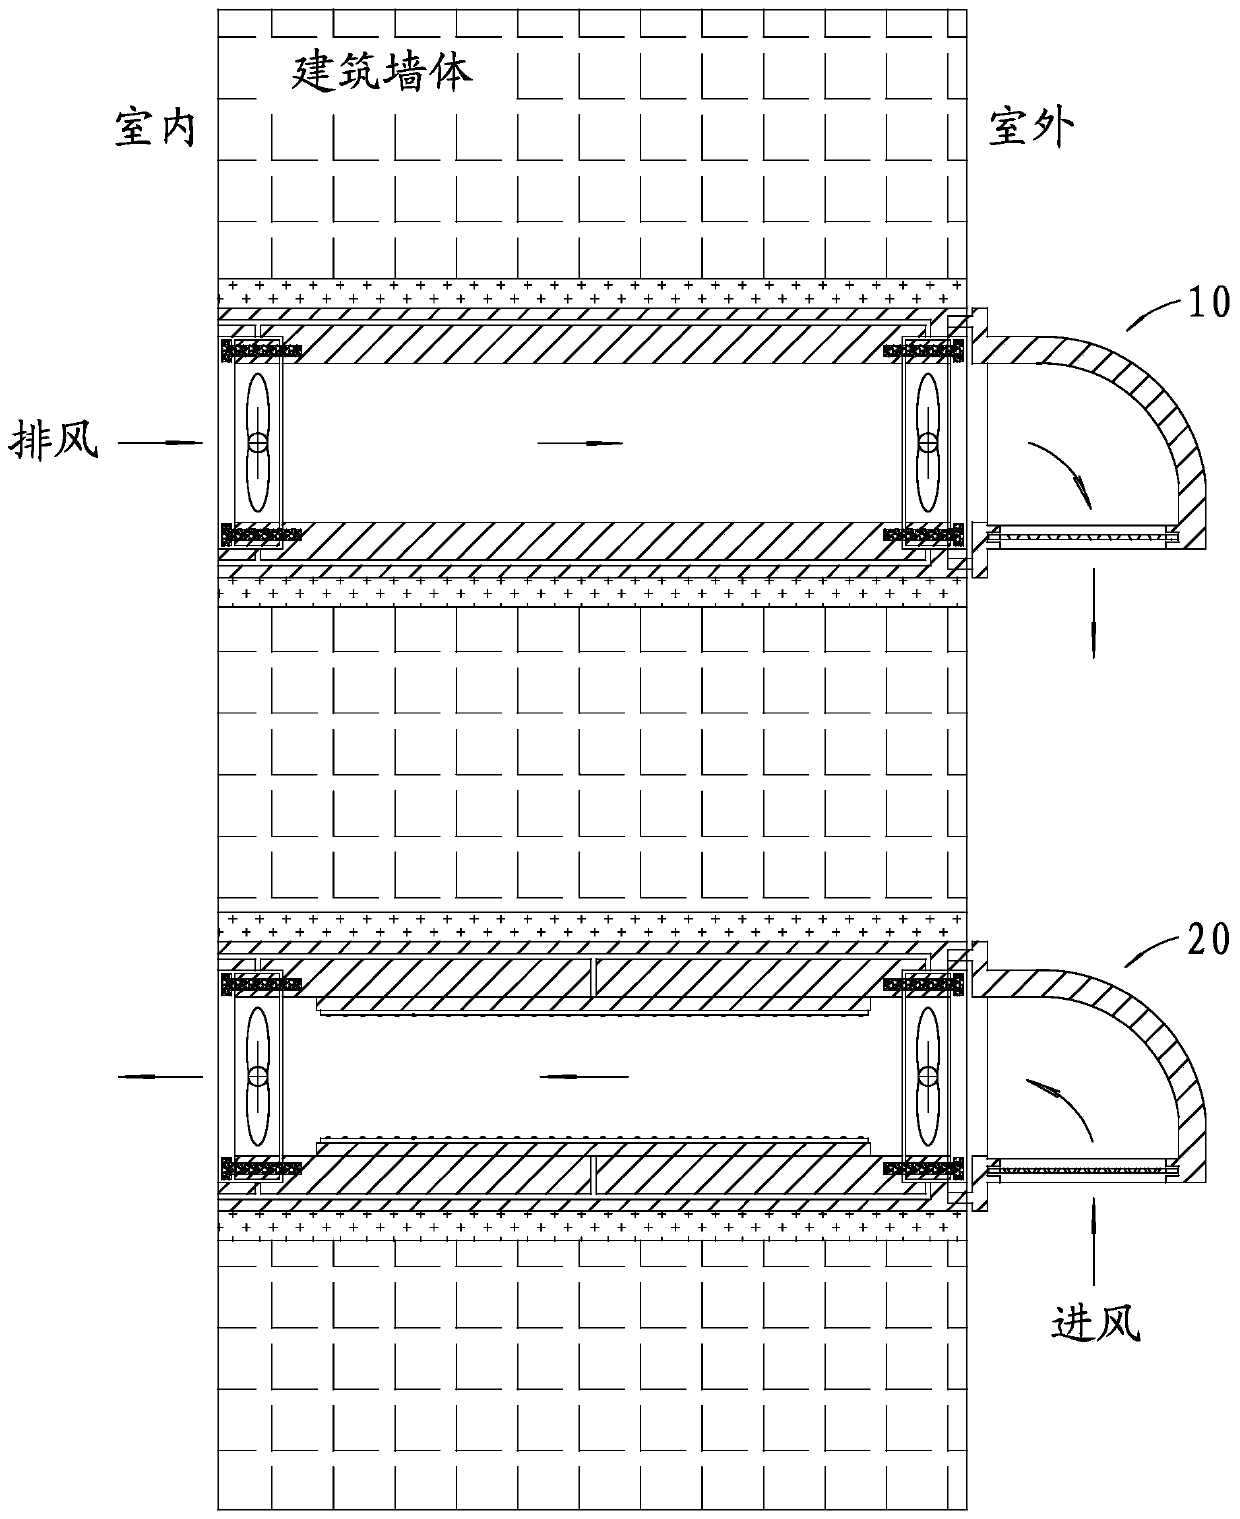 Primary air system pipeline device convenient to mount